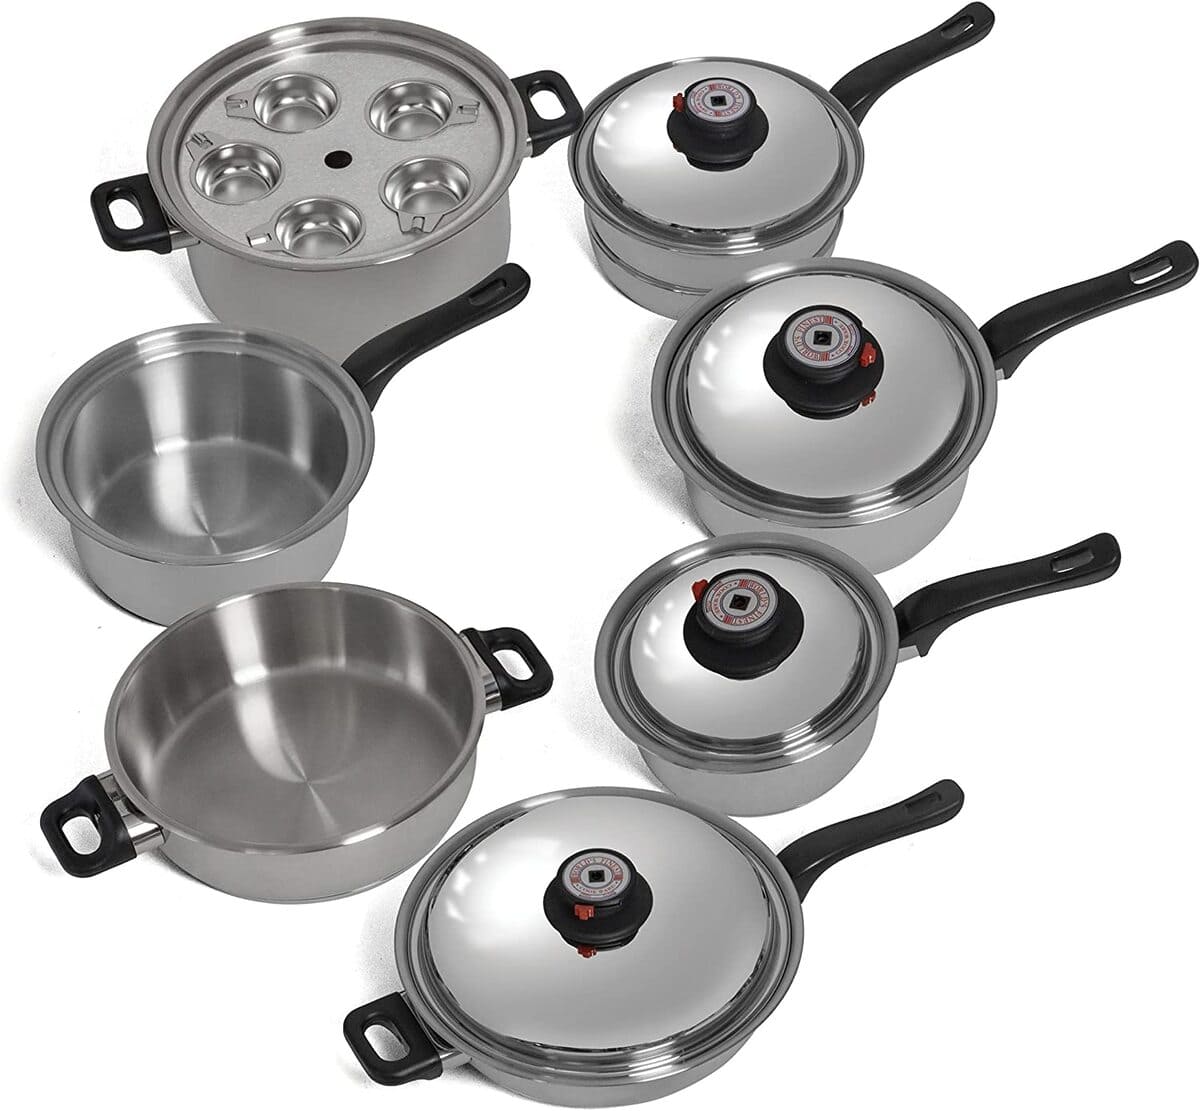 Is Surgical Steel Cookware Safe